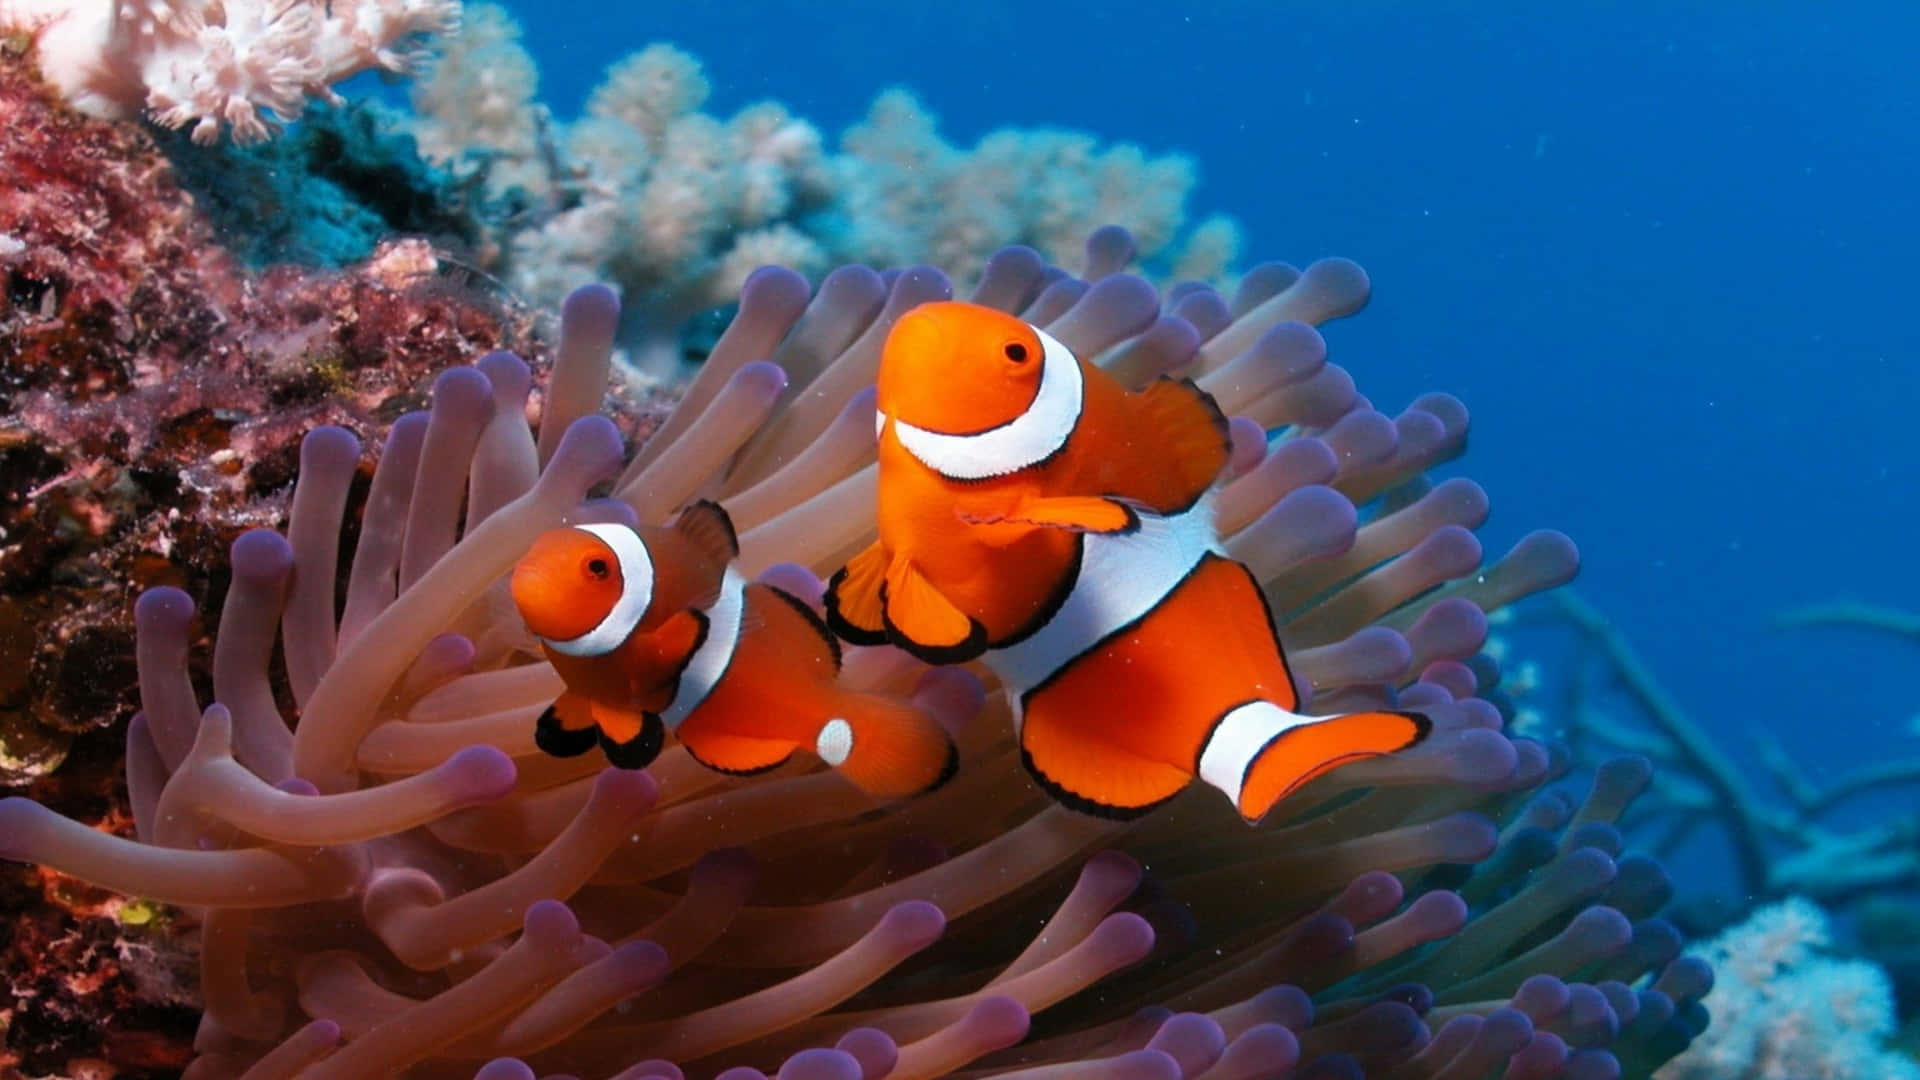 Clown Fishes | LIVE Wallpaper - Wallpapers Central